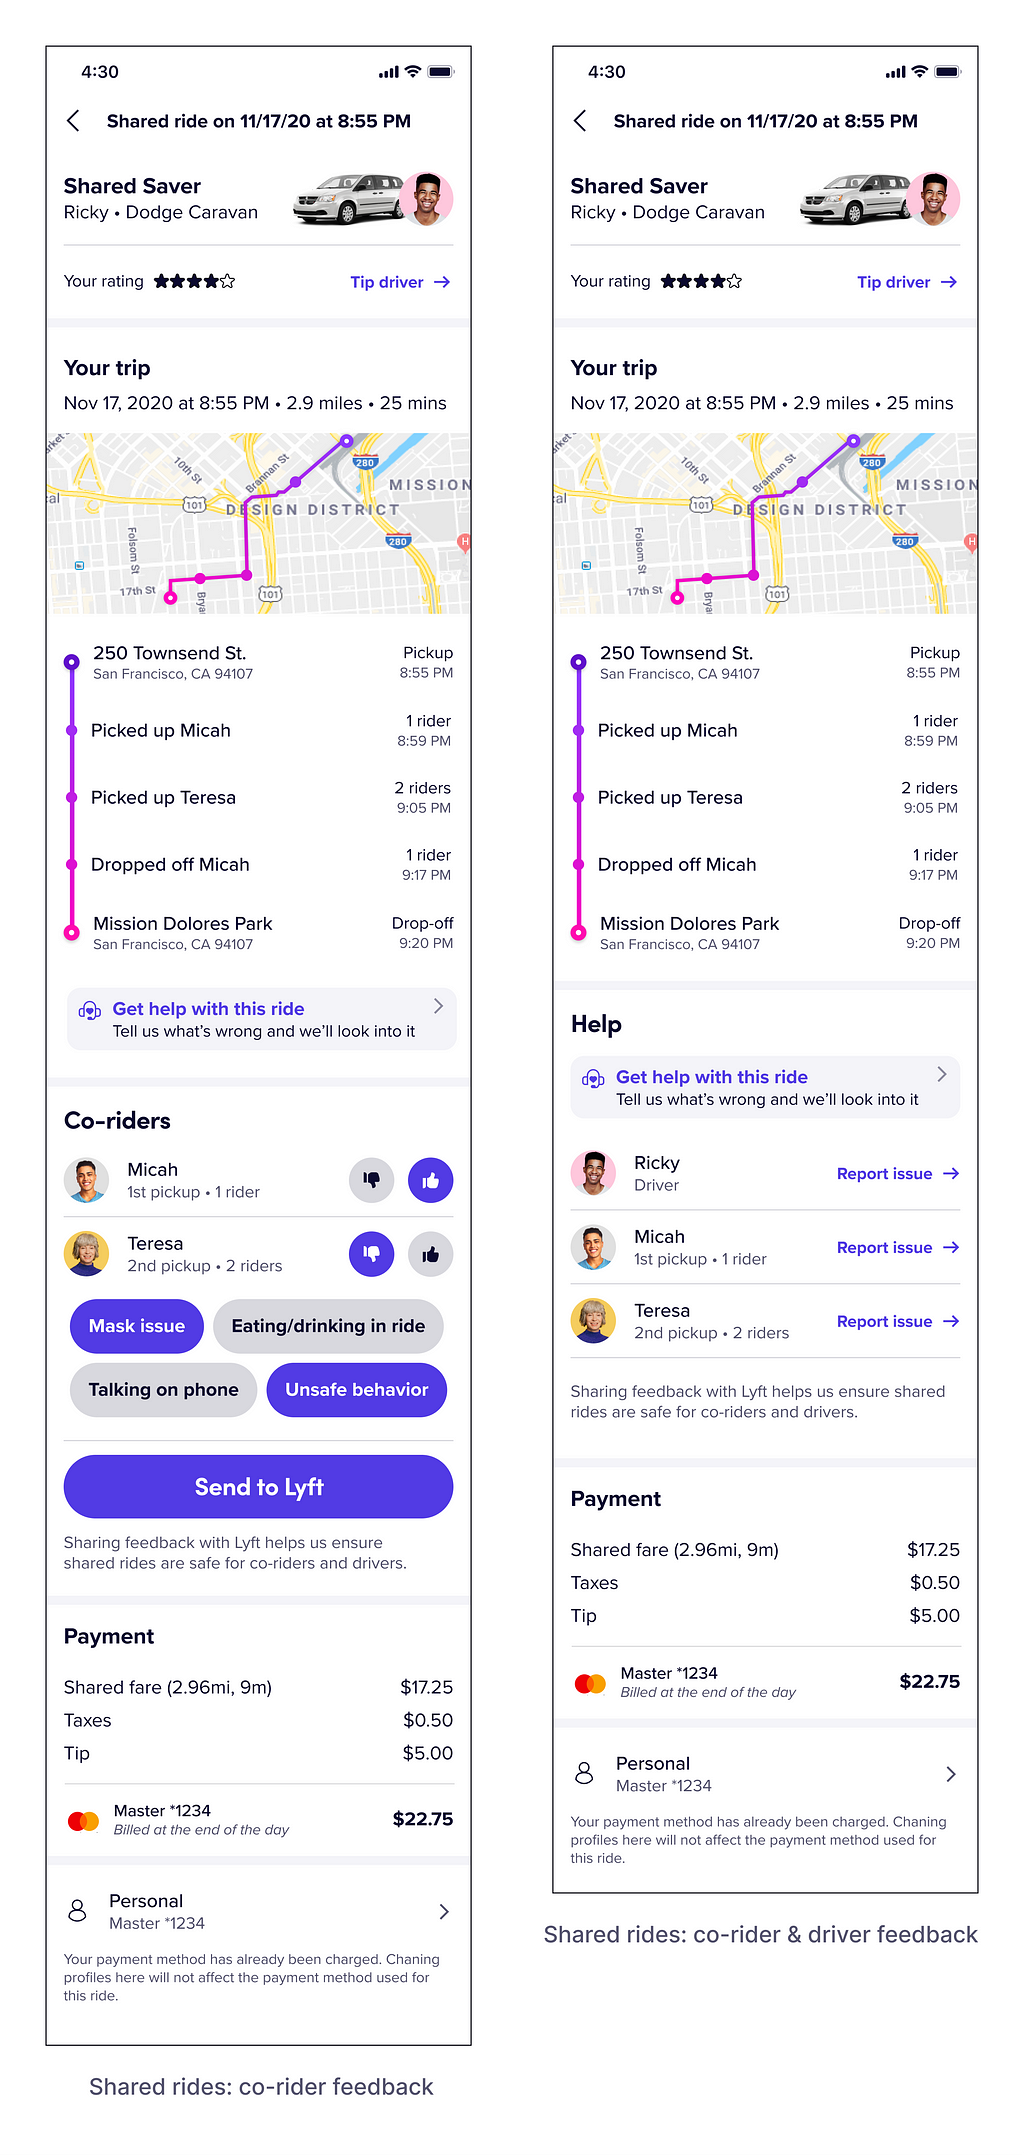 Explorations for adding co-rider feedback and information in shared rides